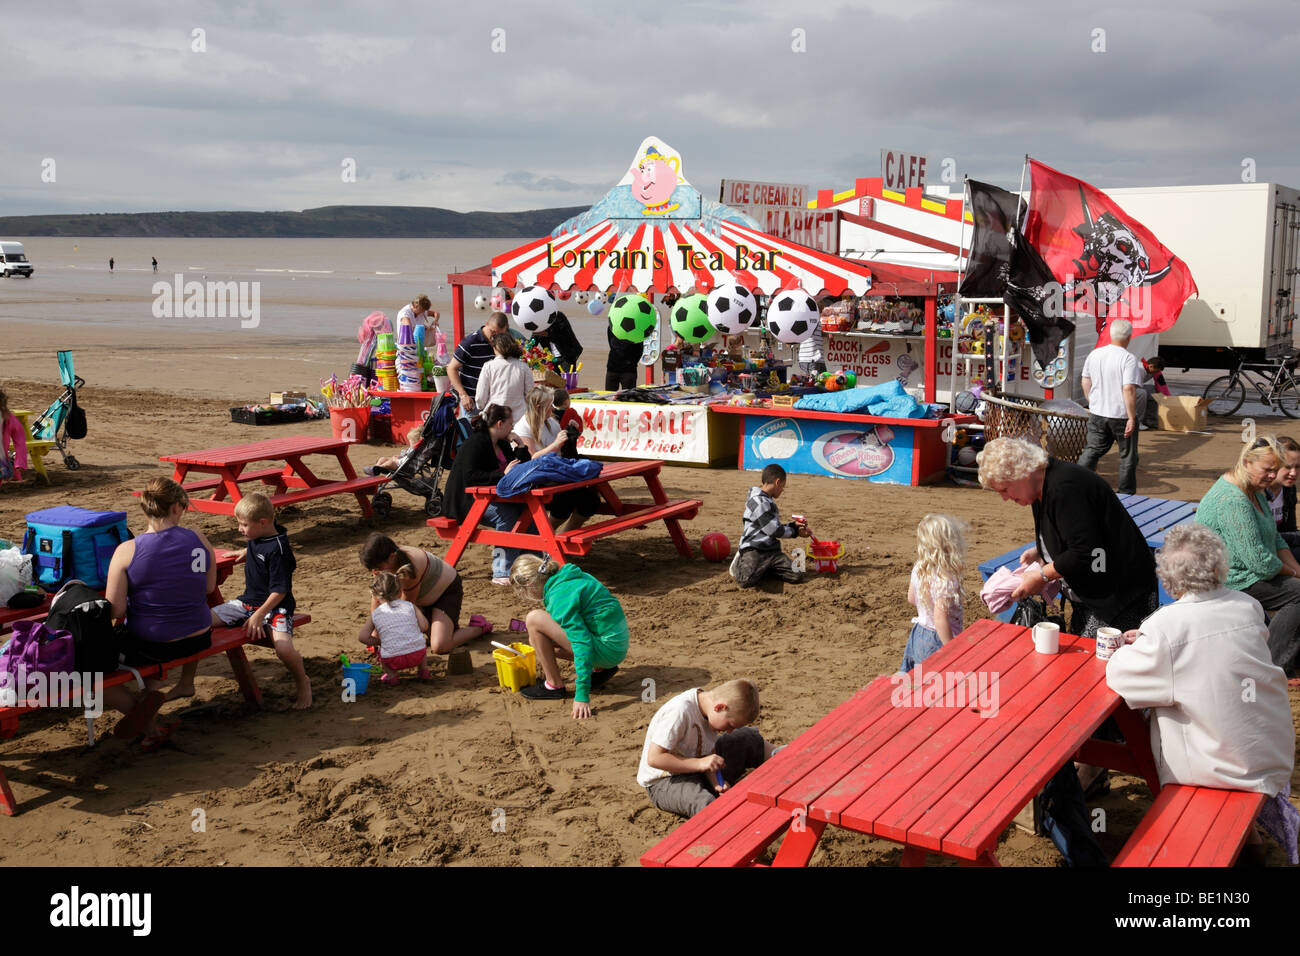 beach cafe and goods stall on the beach at weston-super-mare somerset uk Stock Photo